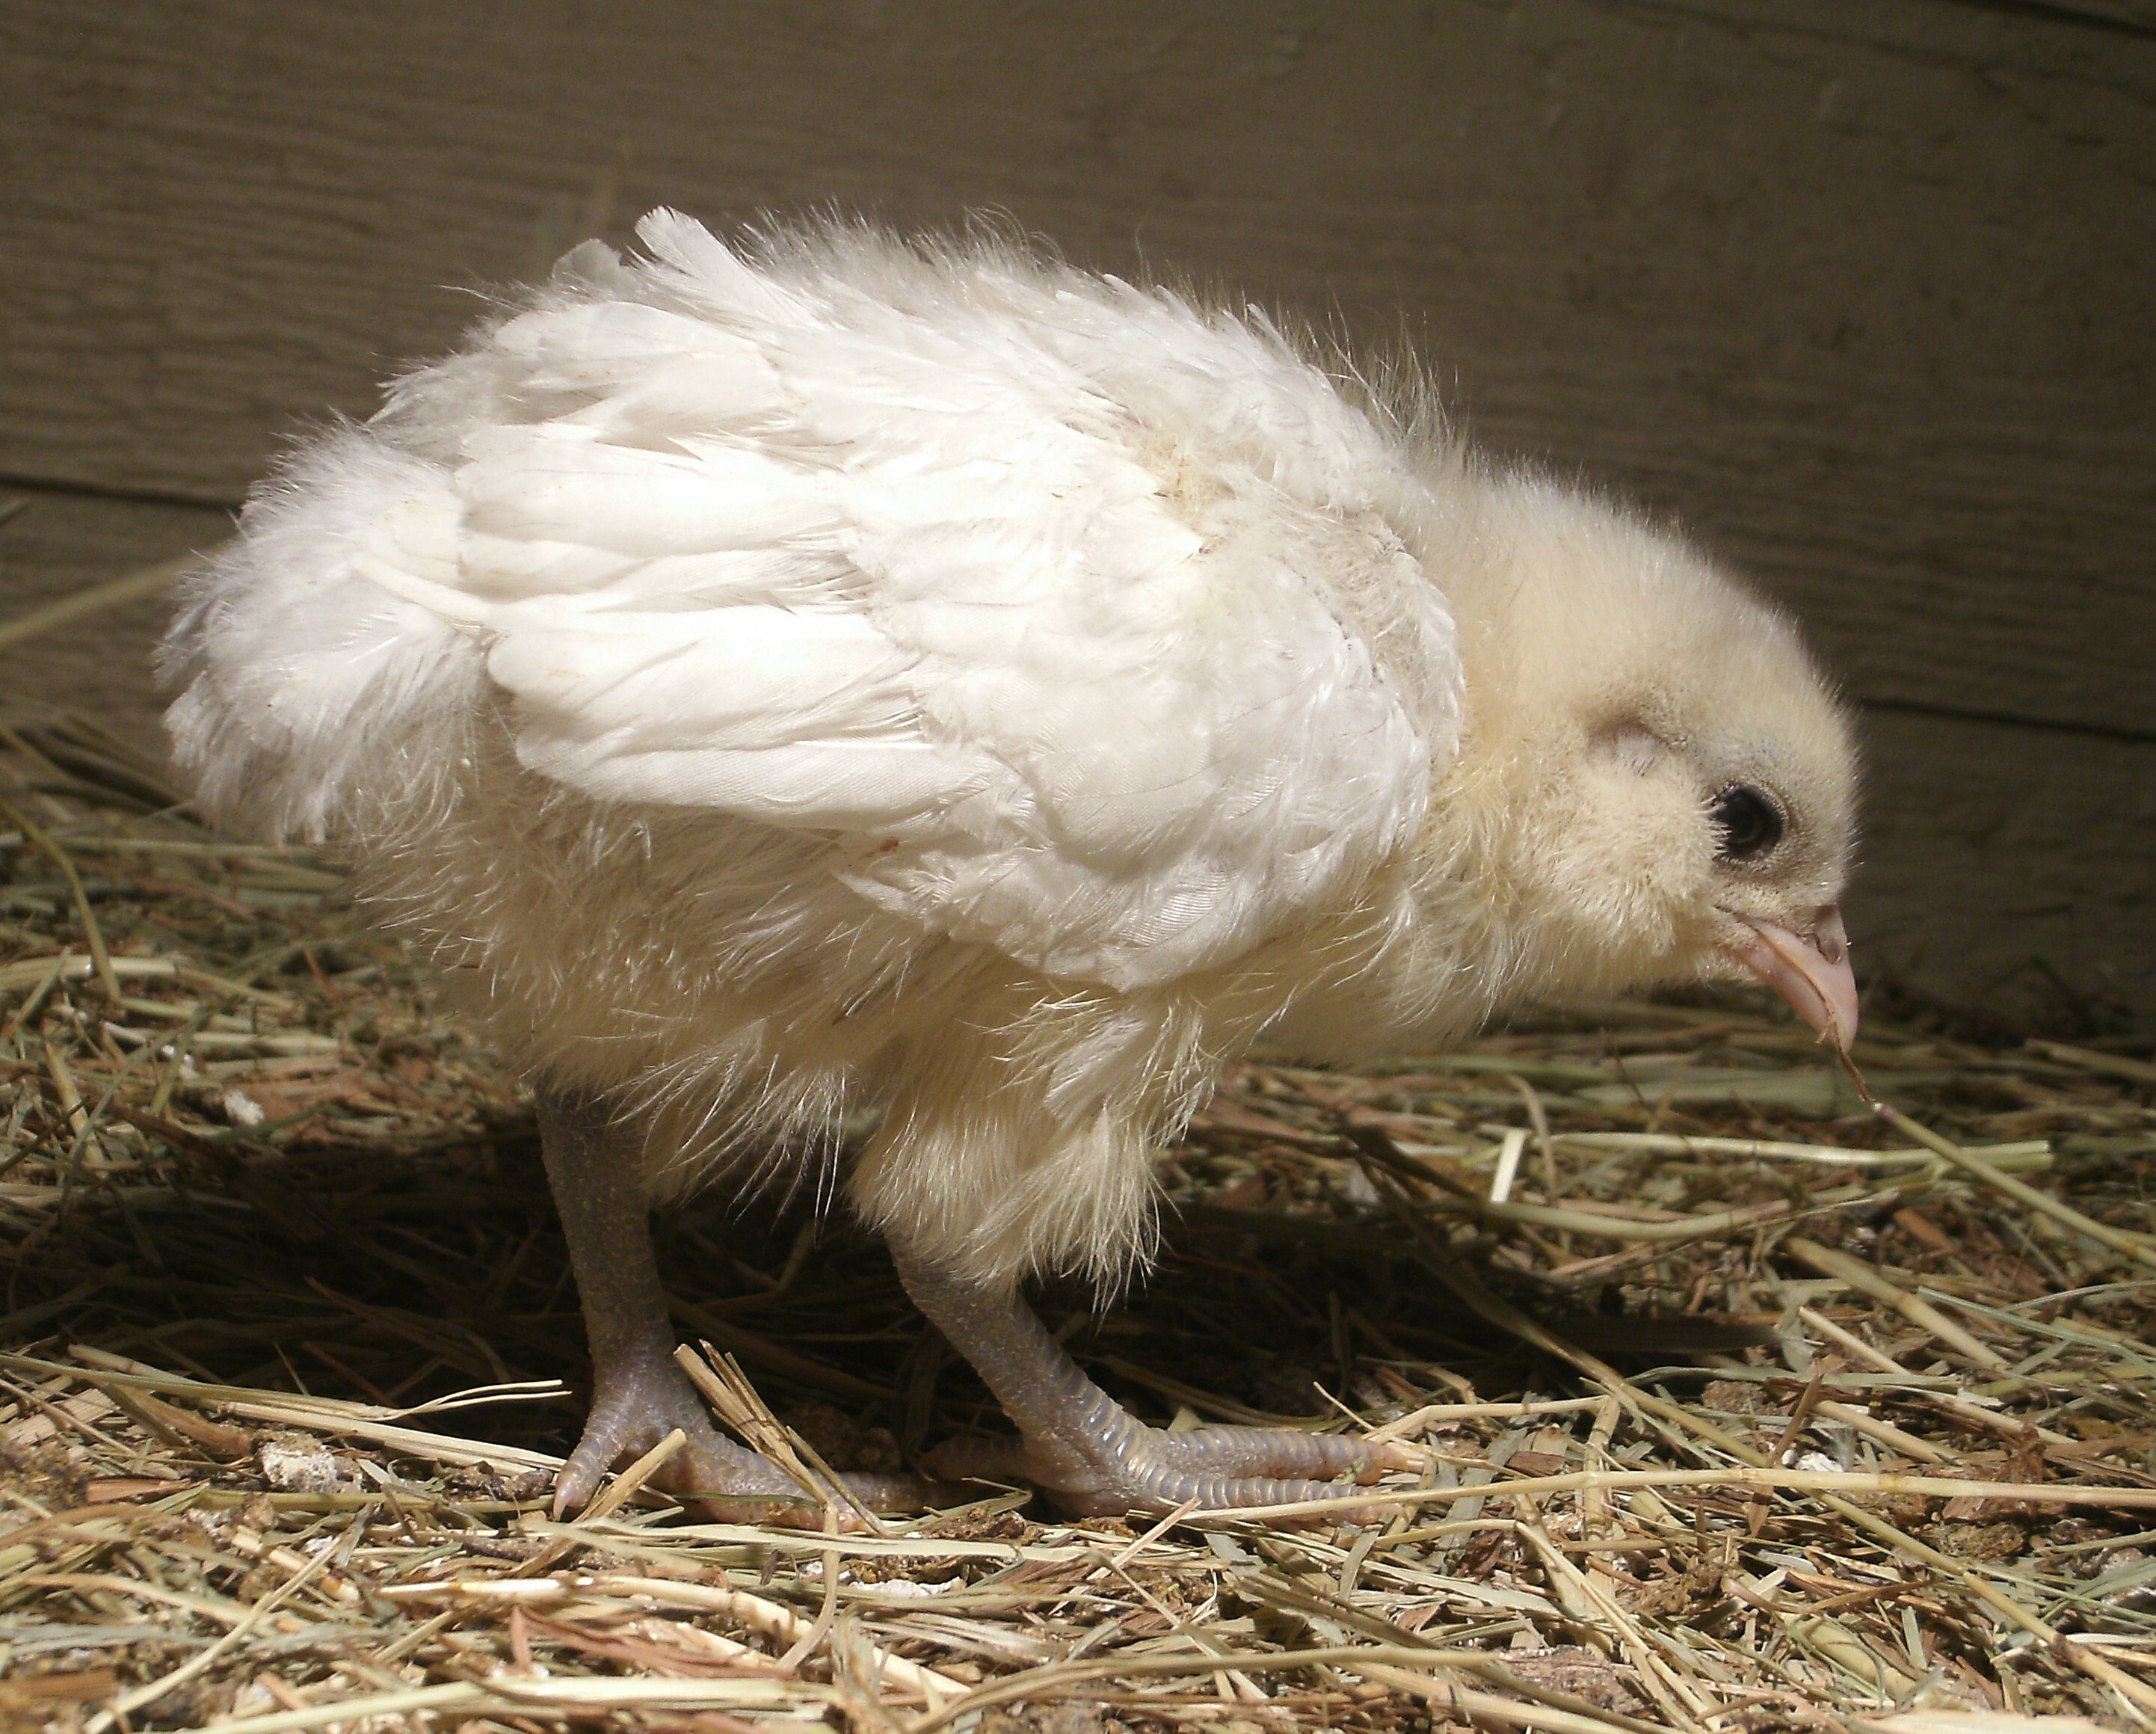 "Tail Feathers"
White Ameraucana Chick
1.5 weeks old